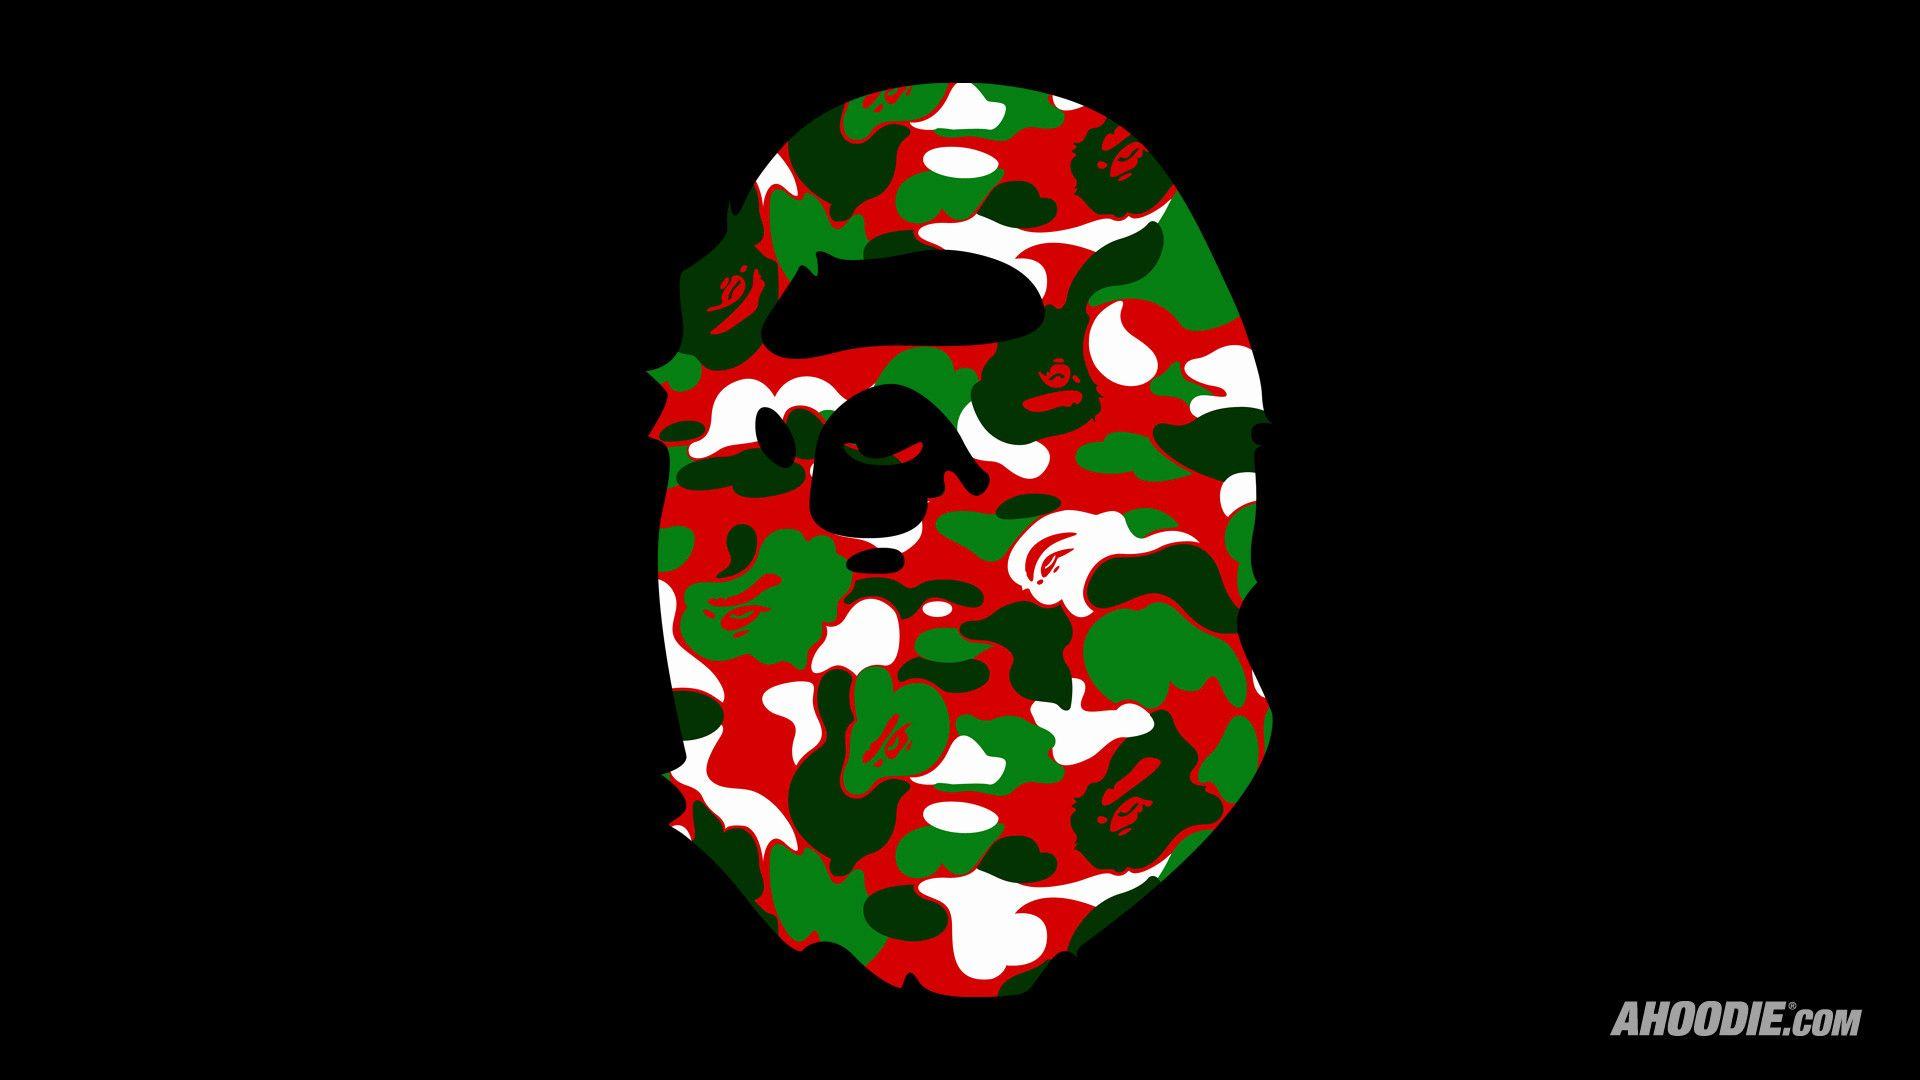 Pin on Bape x Undefeated Iphone Wallapaper